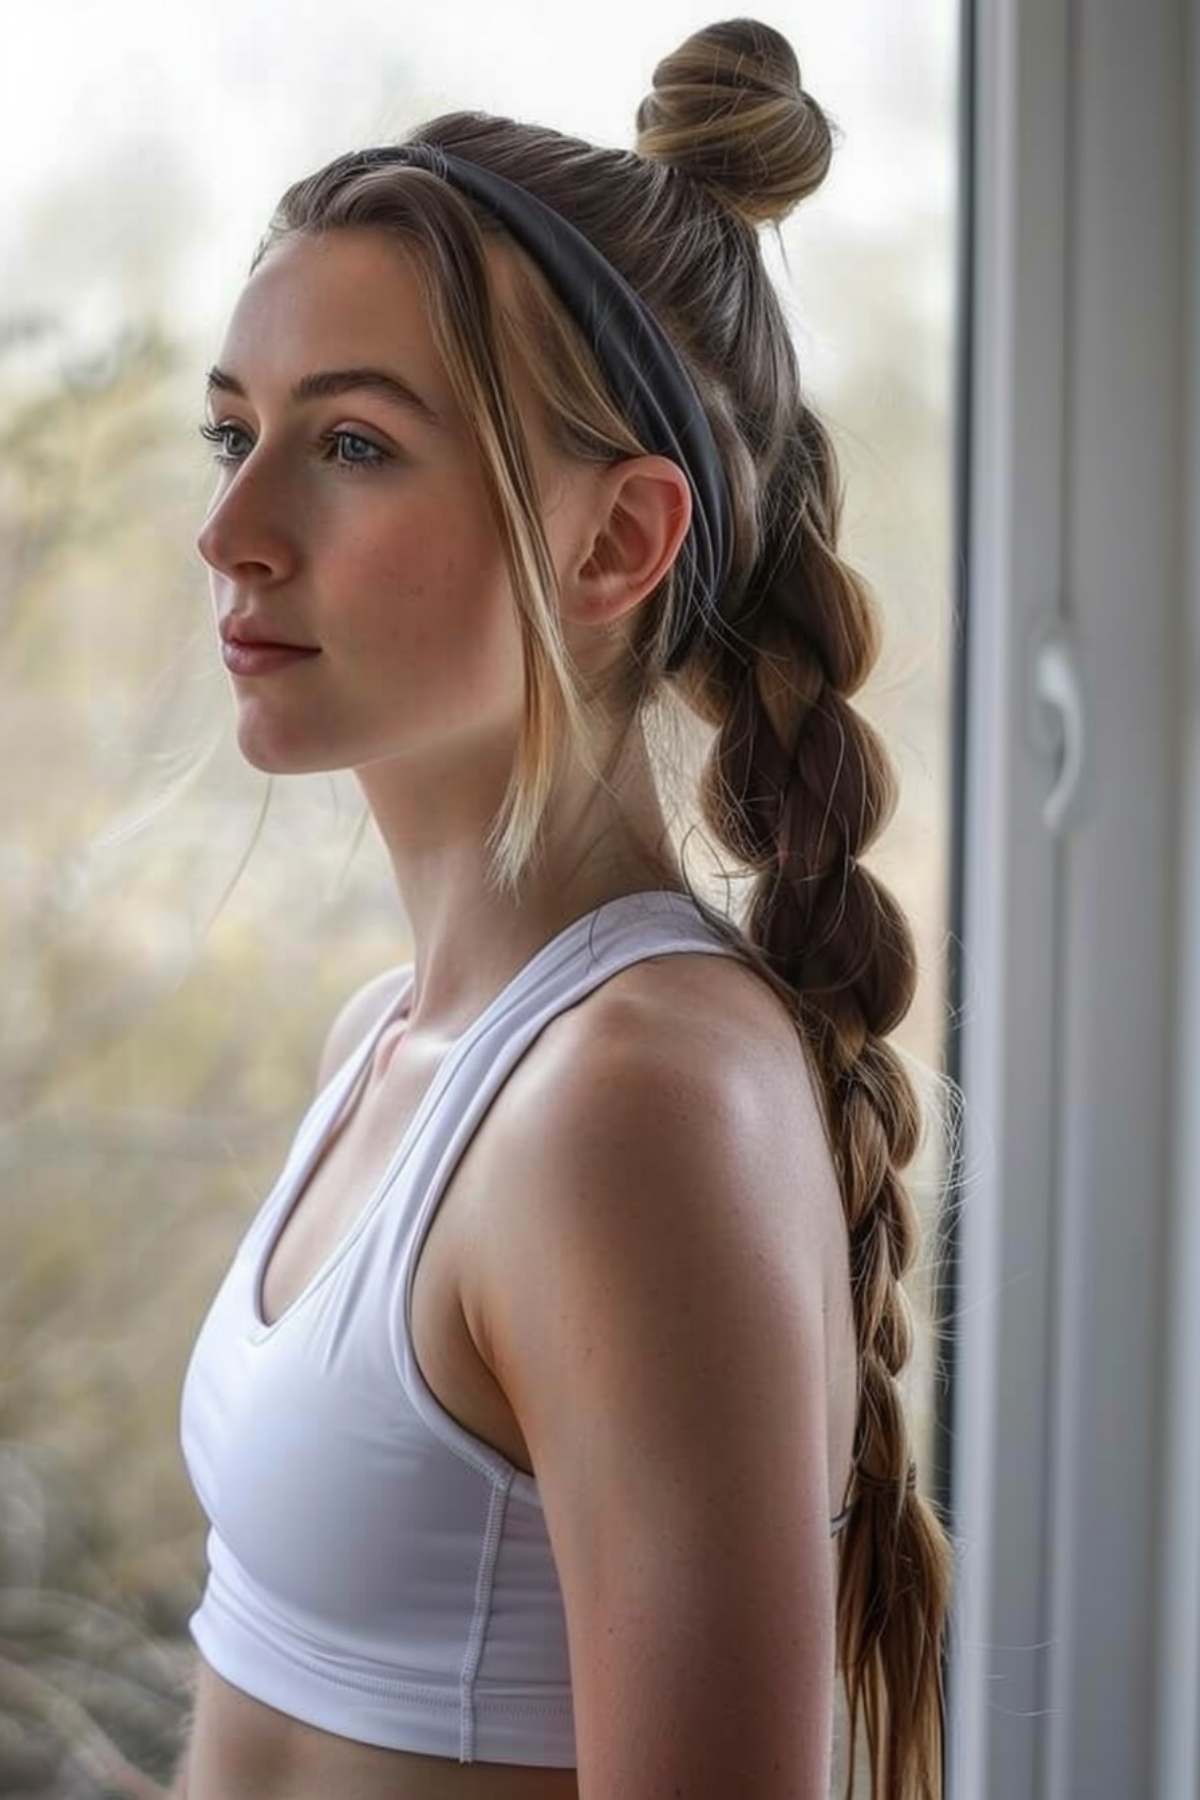 Innovative sporty hairstyle with a high bun and low ponytail, complemented by a headband, ideal for active lifestyles requiring quick hair preparation.